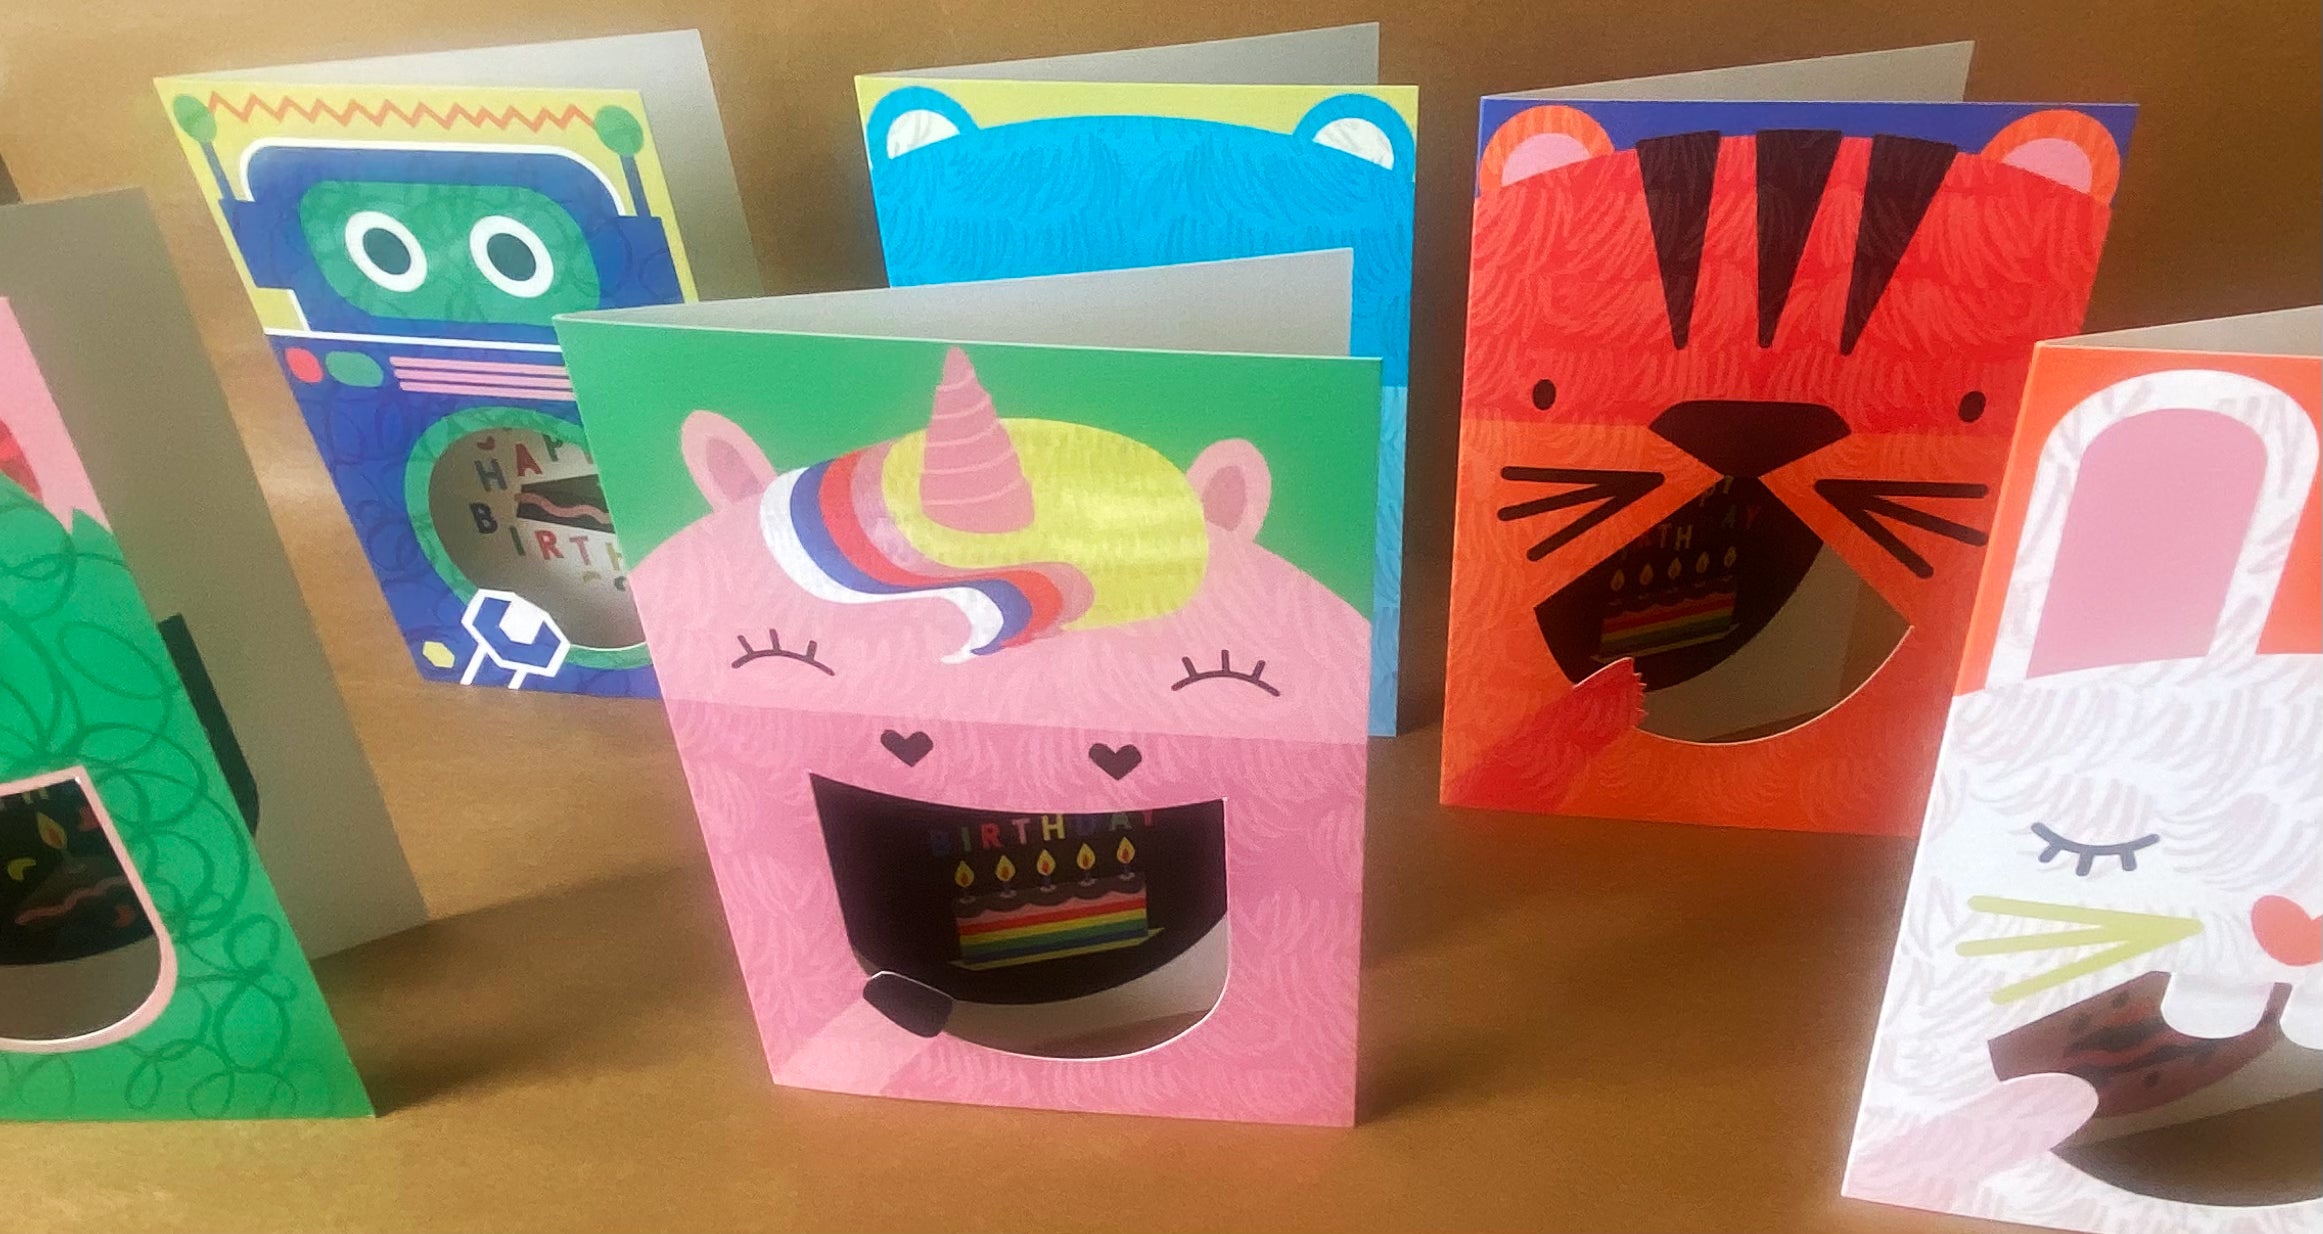 Unique kids birthday cards with fun cutouts